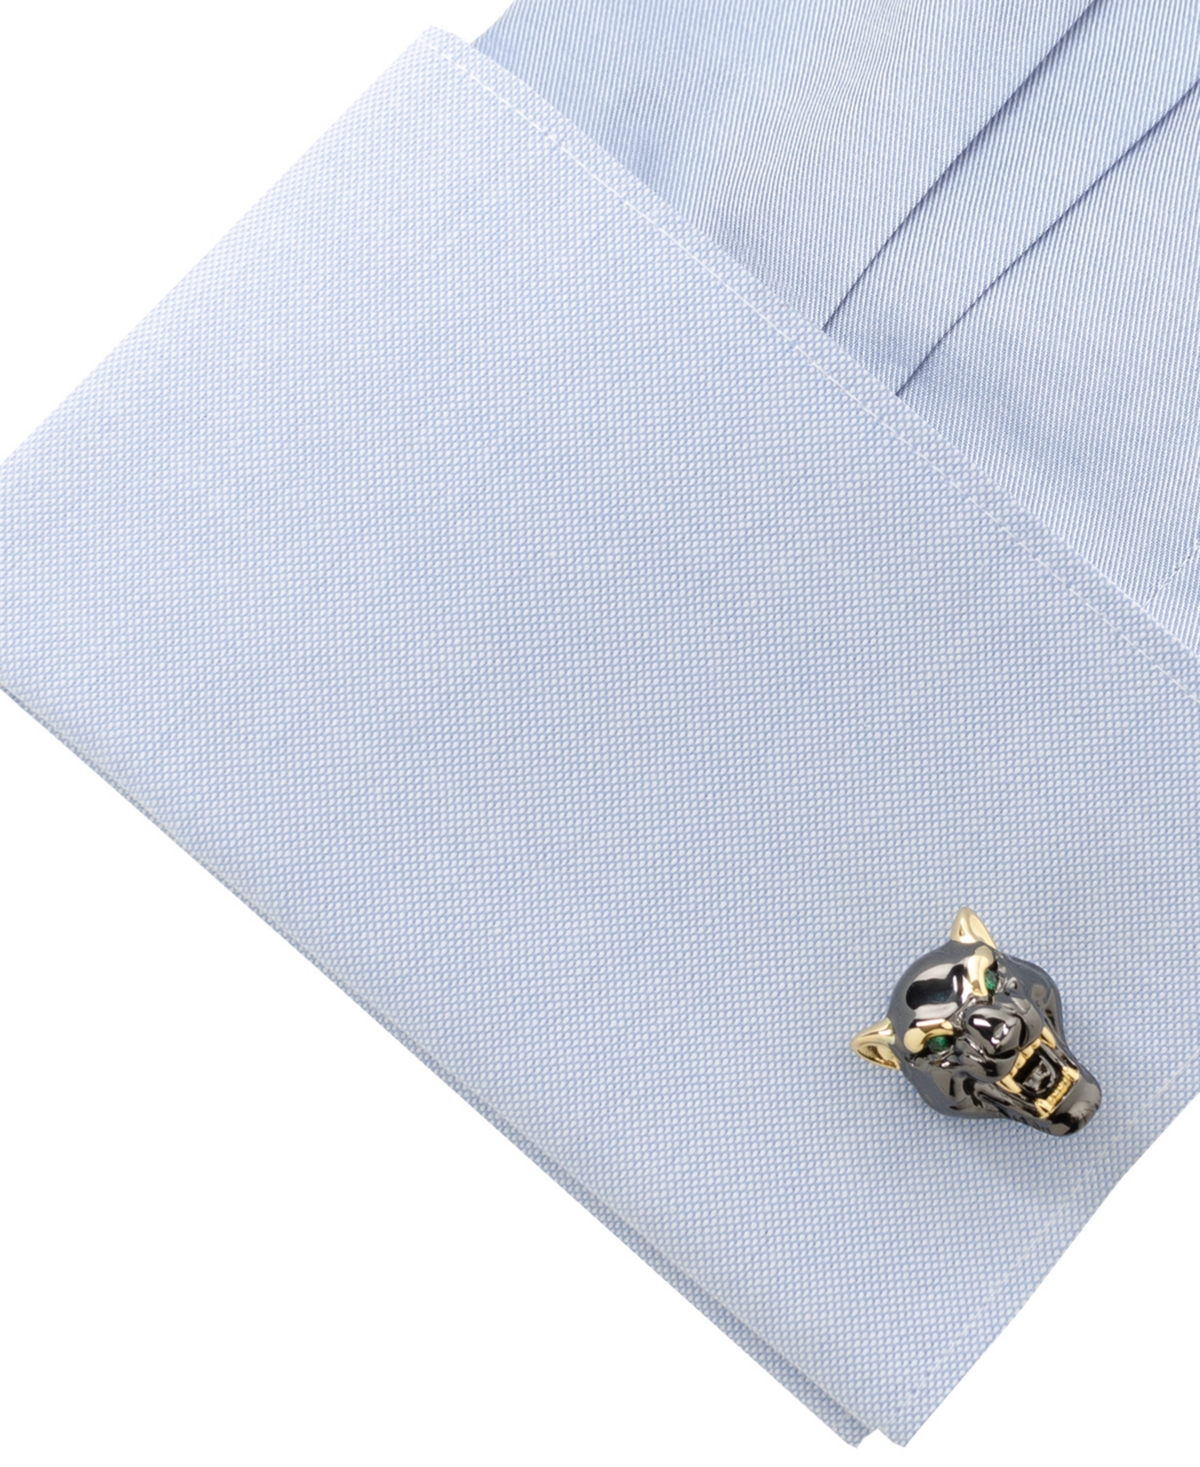 Shop Ox & Bull Trading Co. Men's Sterling Silver Black And Gold-tone Panther Cufflinks